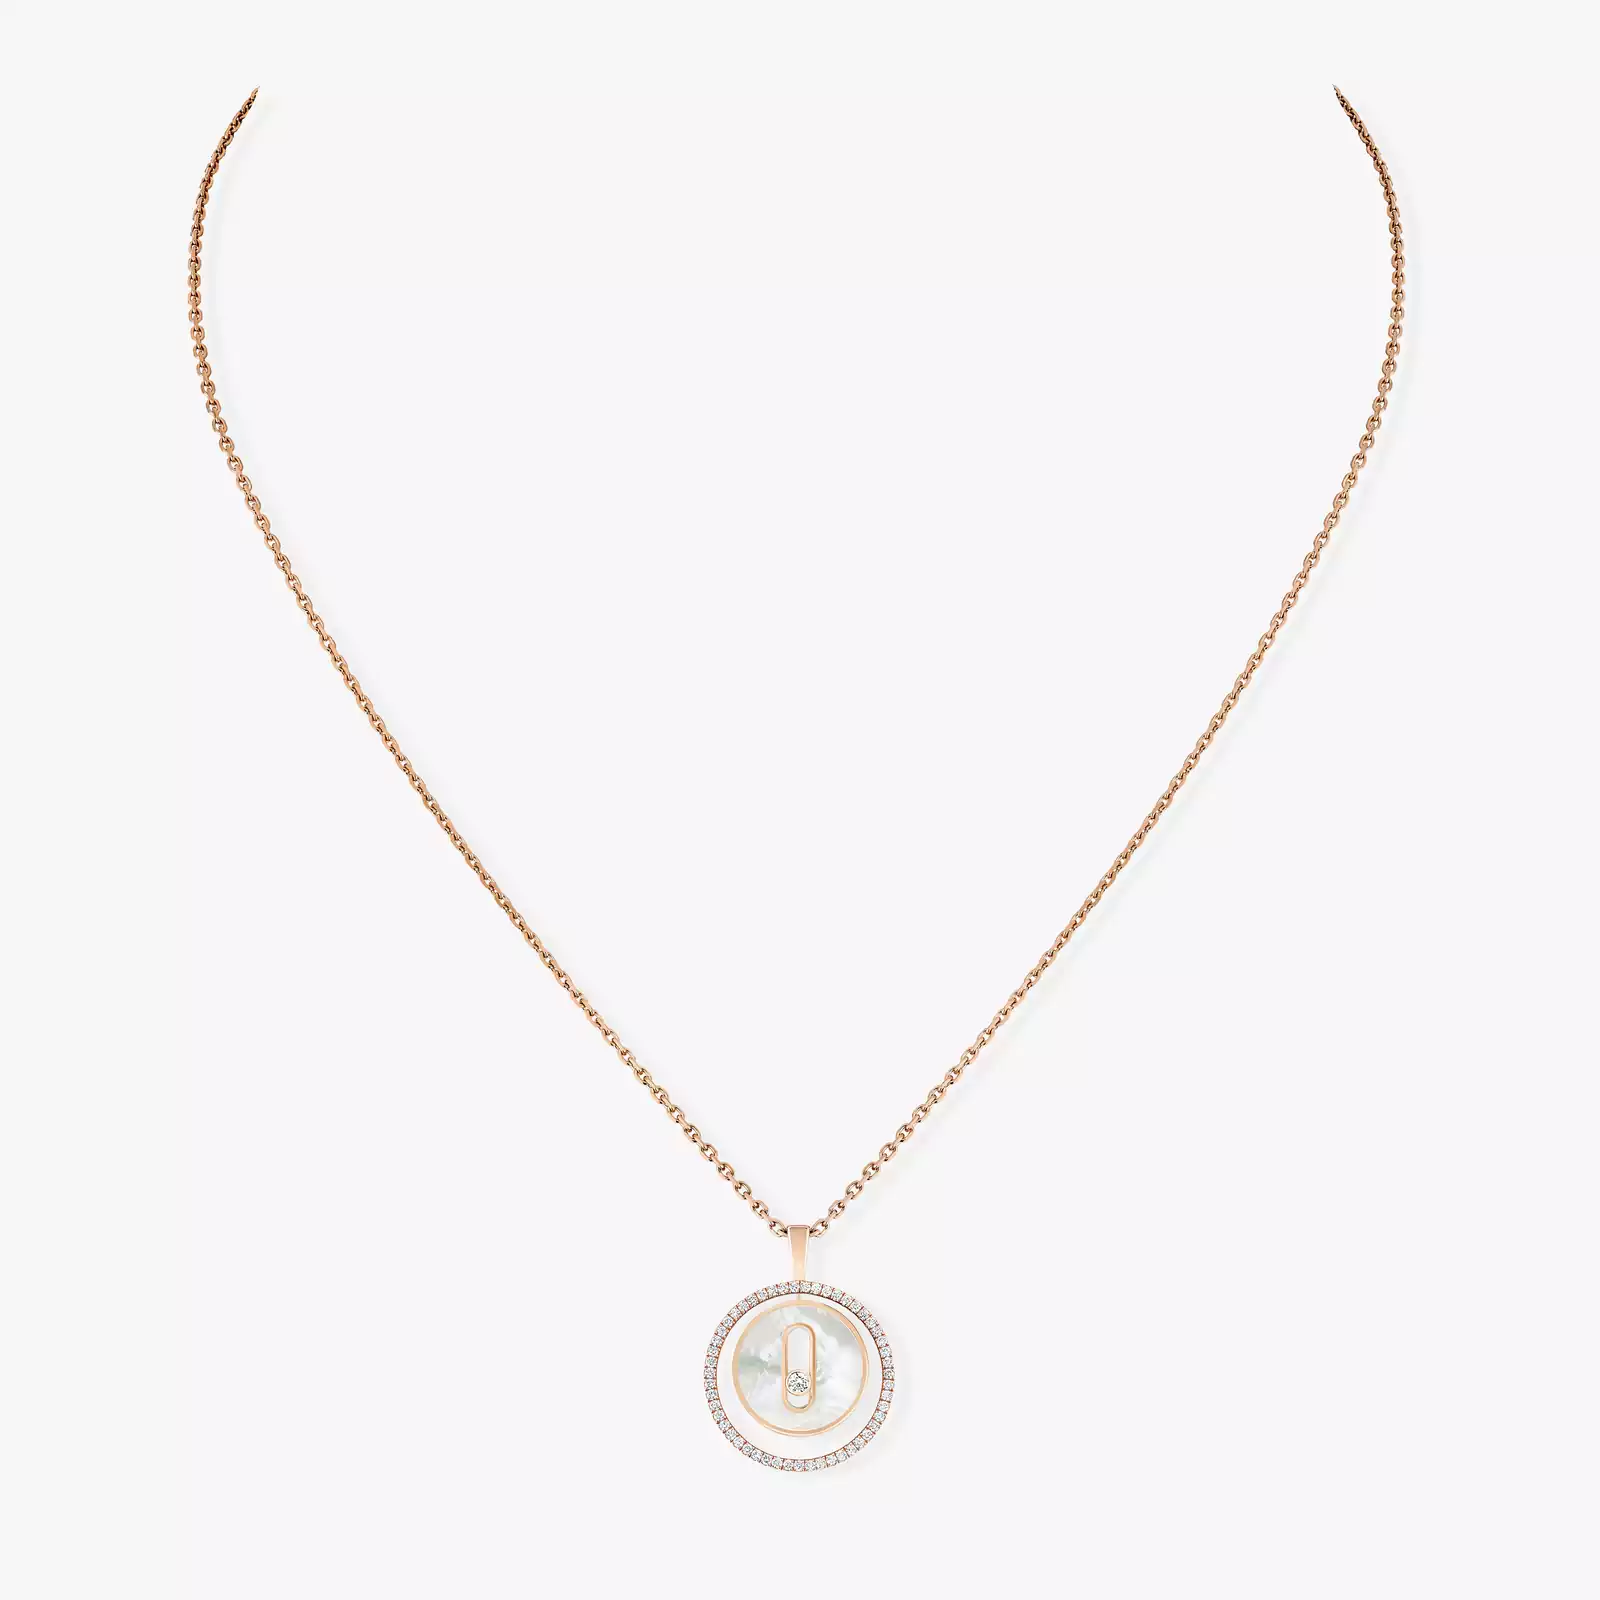 White Mother-of-Pearl Lucky Move SM Necklace Pink Gold For Her Diamond Necklace 11650-PG